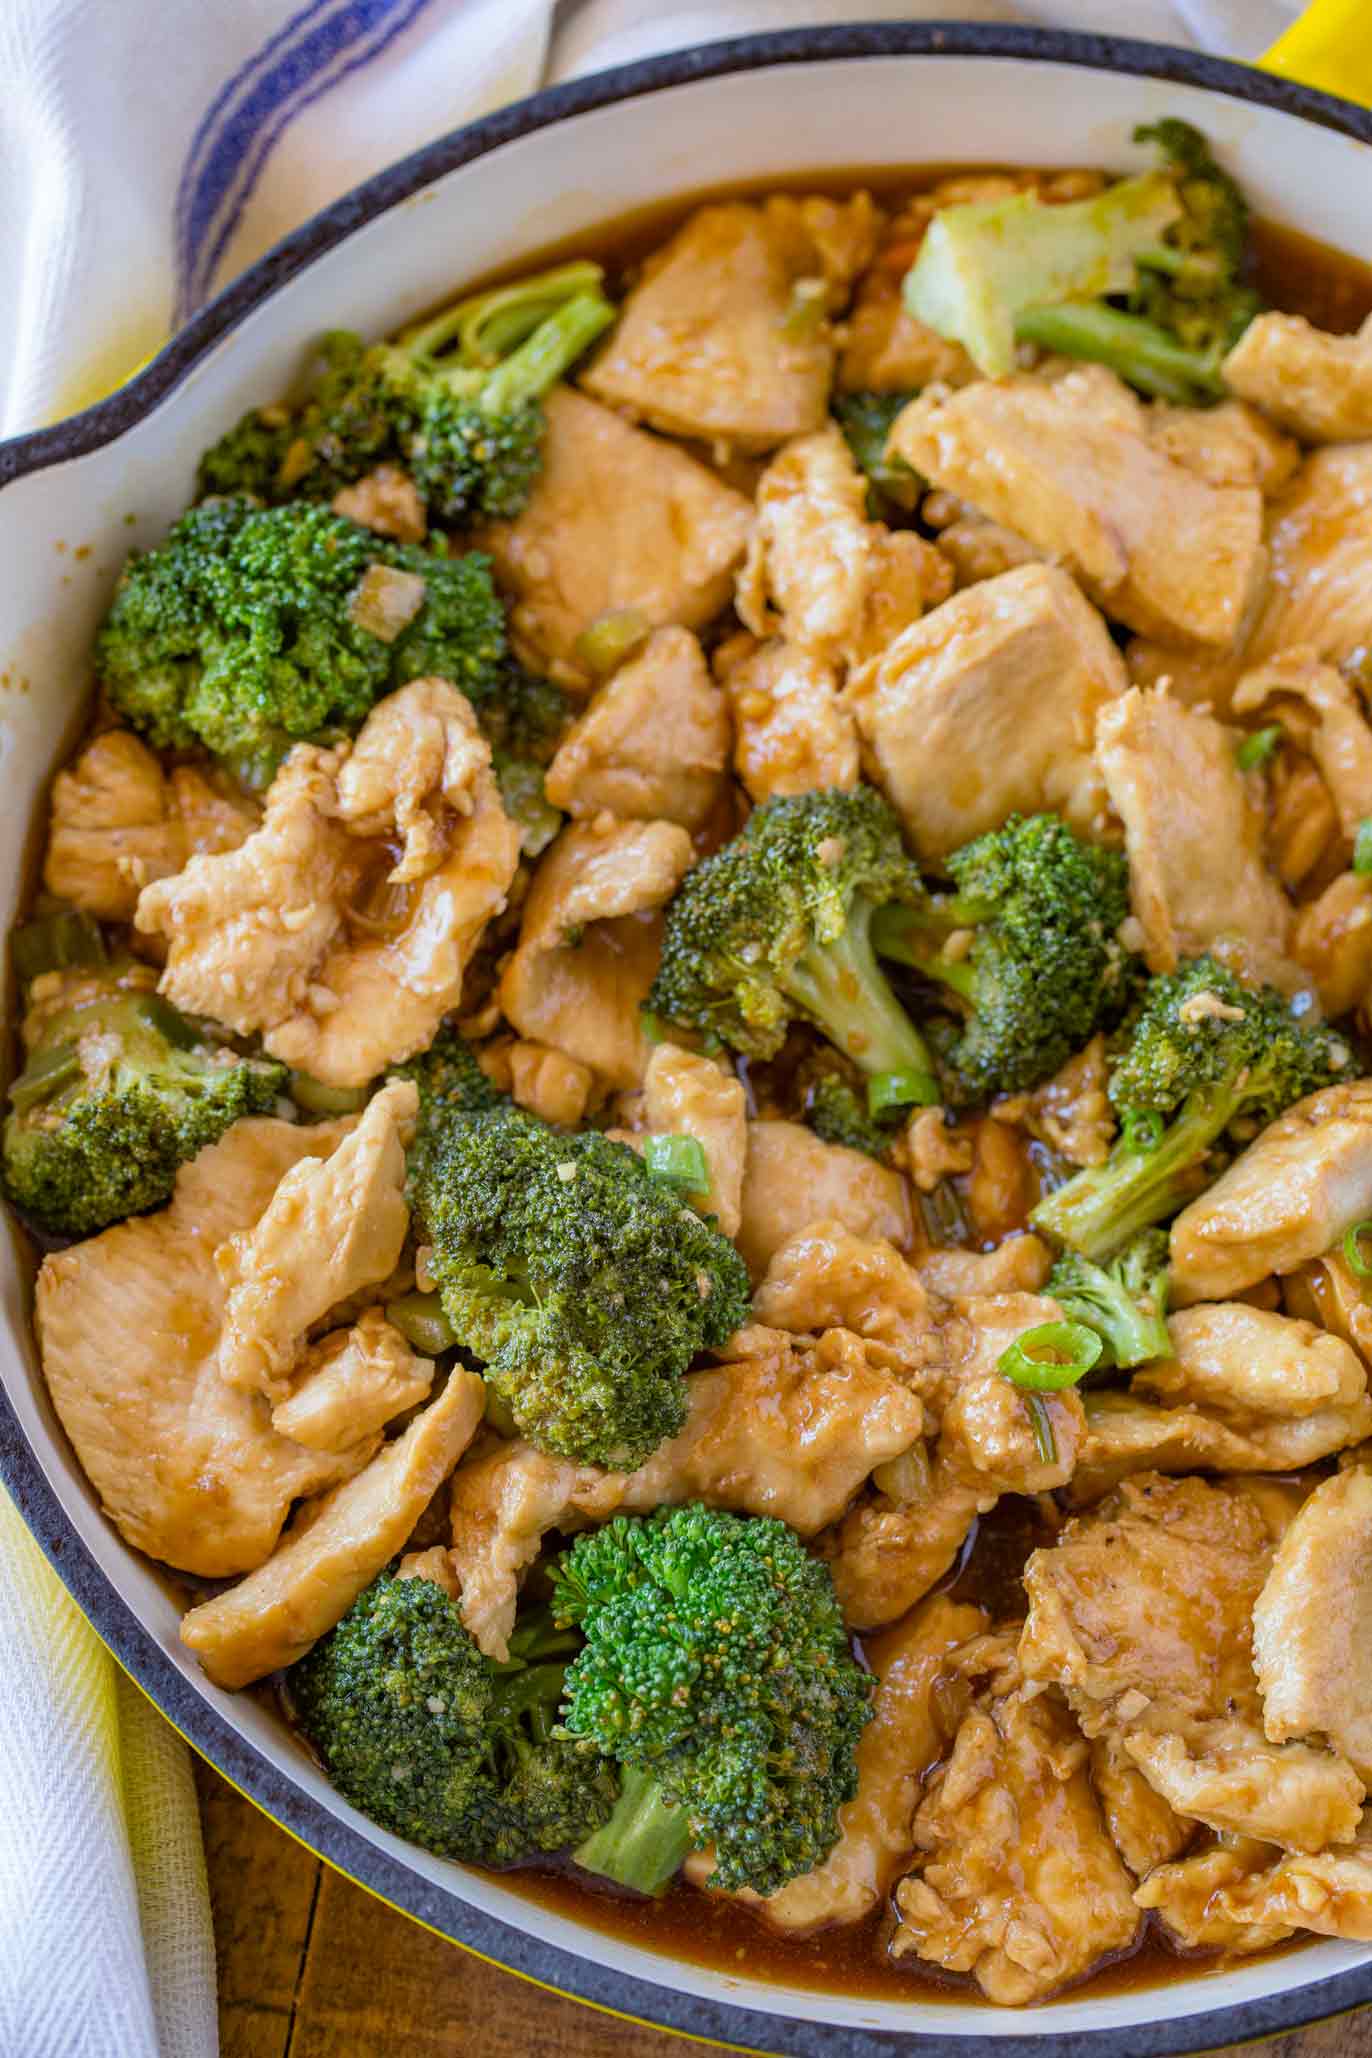 Ginger Chicken Stir Fry Cooking Made Healthy